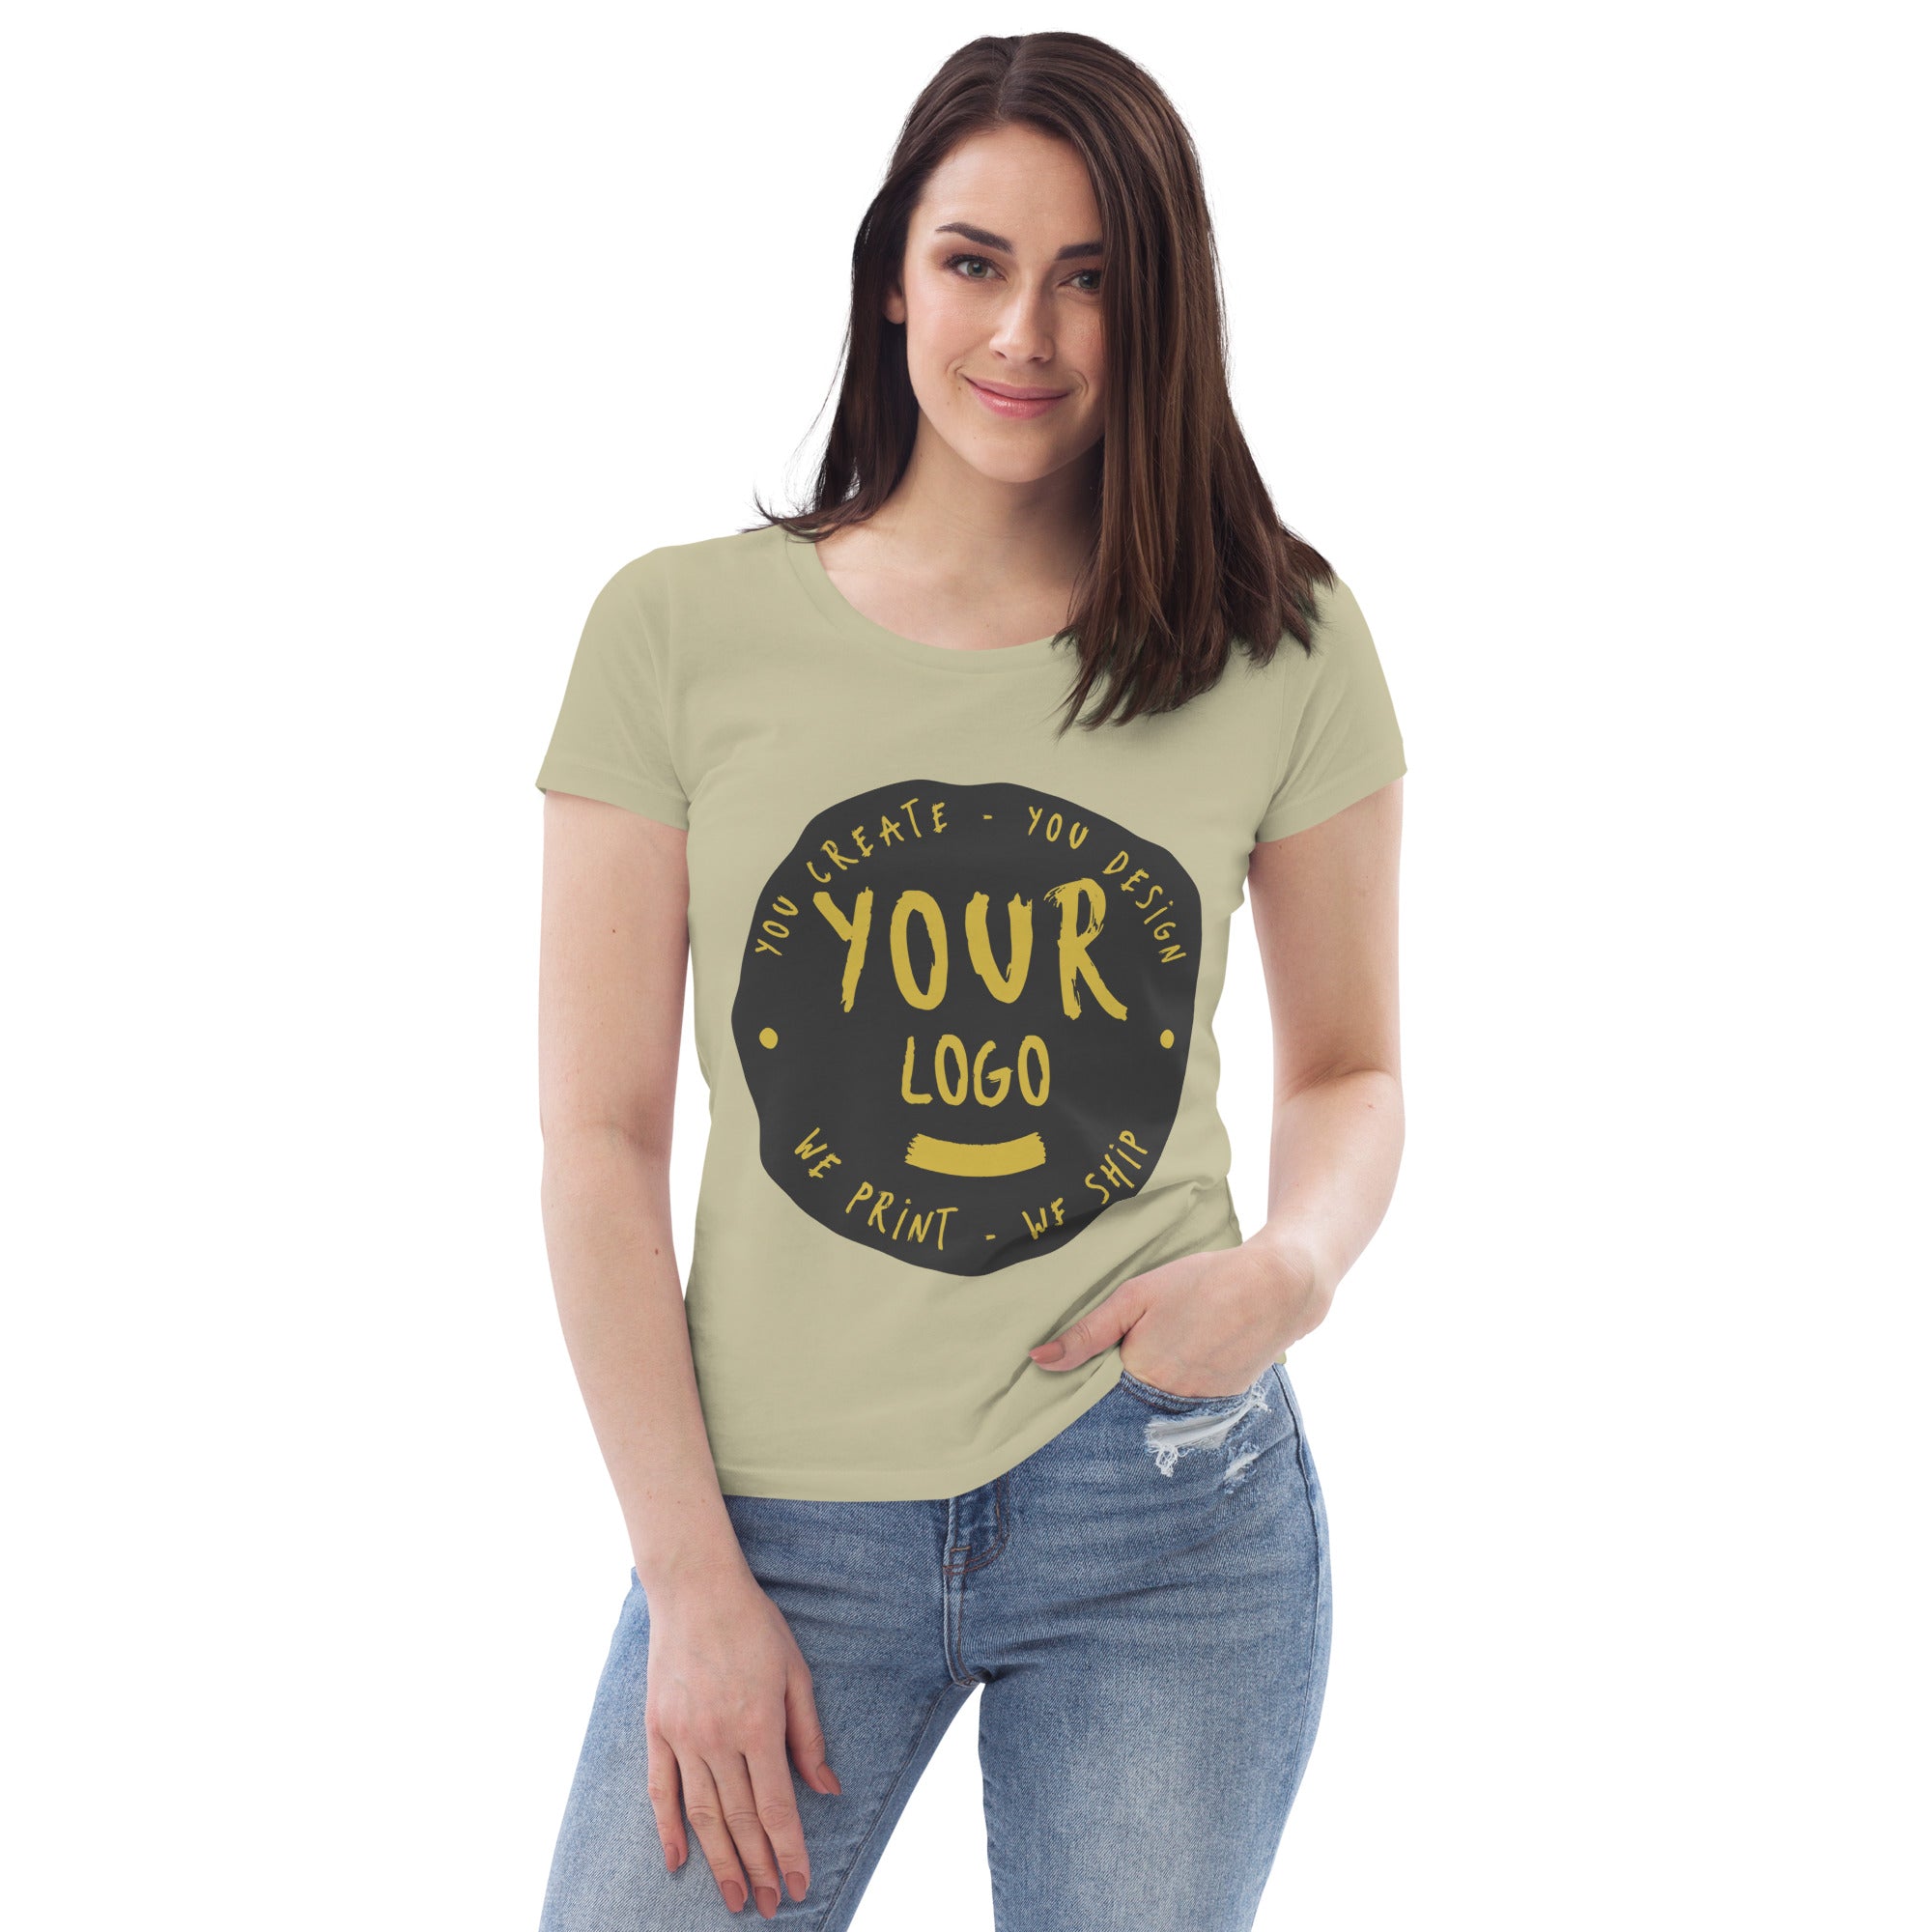 Women's Fitted Eco T-Shirt